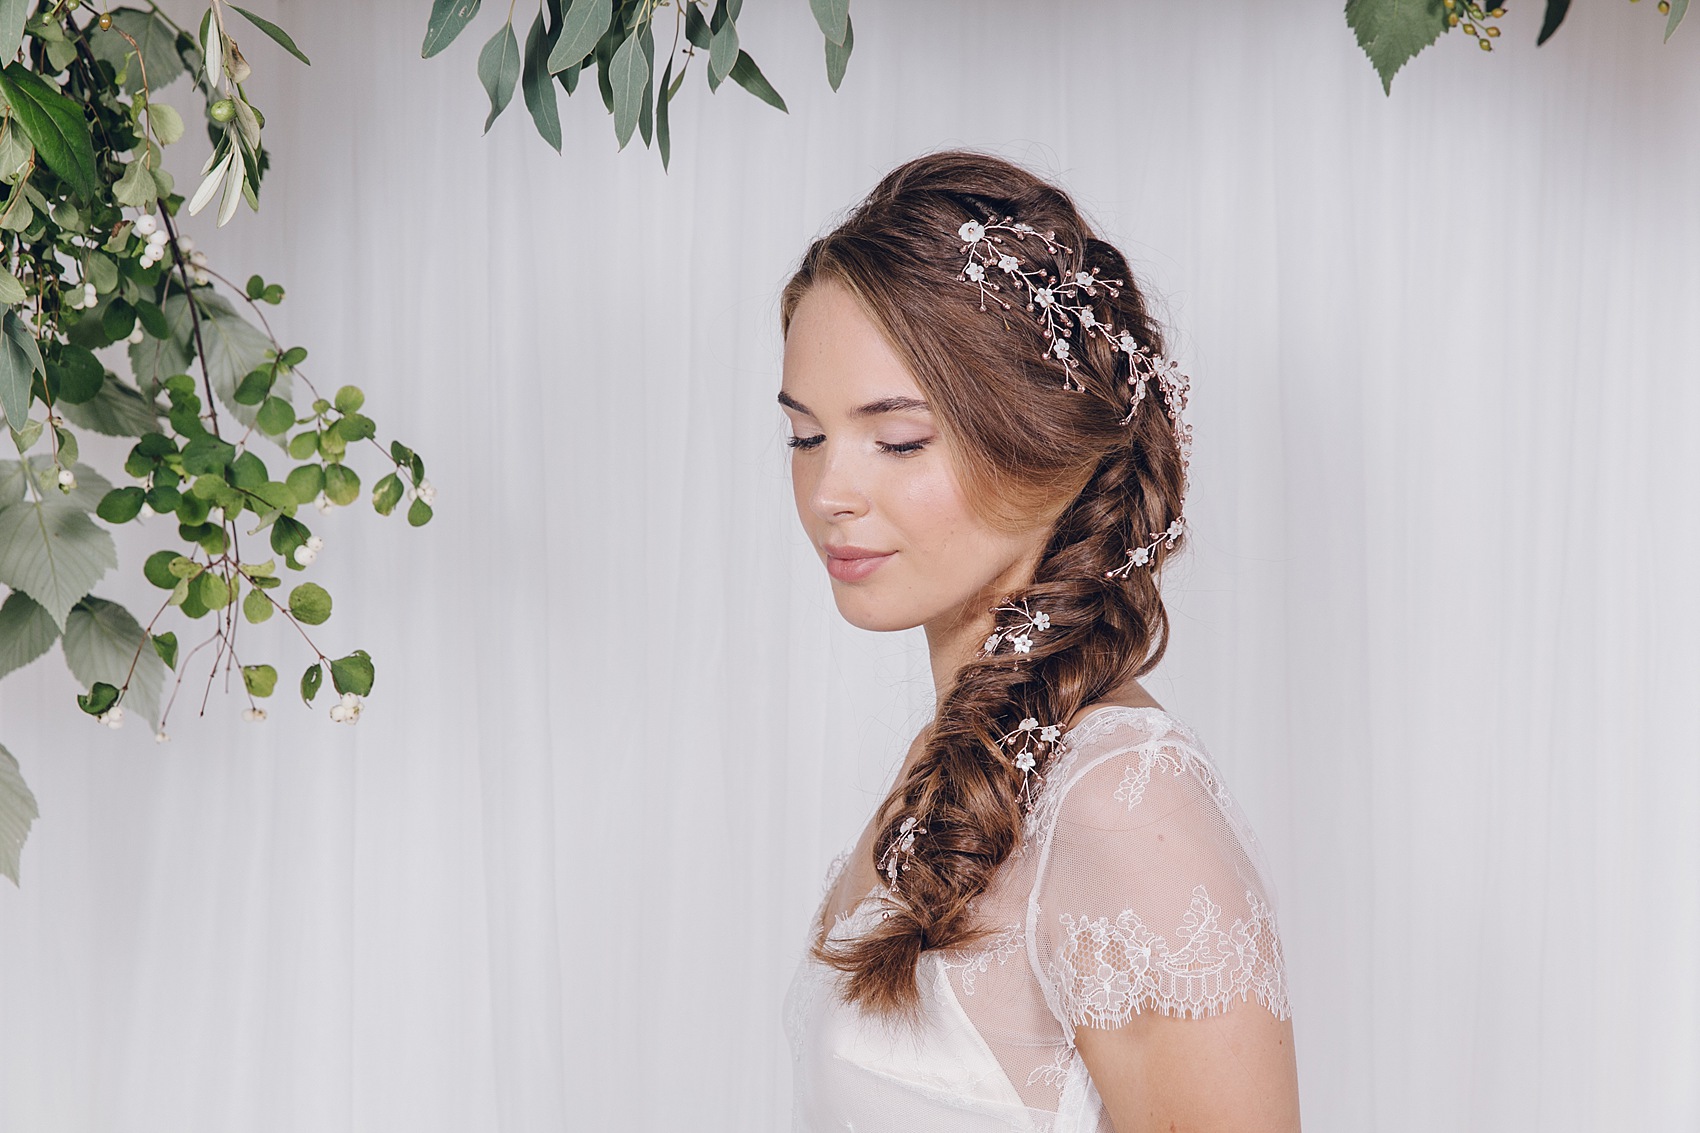 Coralie hair pins set of three with Annette hair vine in rose gold pinned into wedding braid plait 6